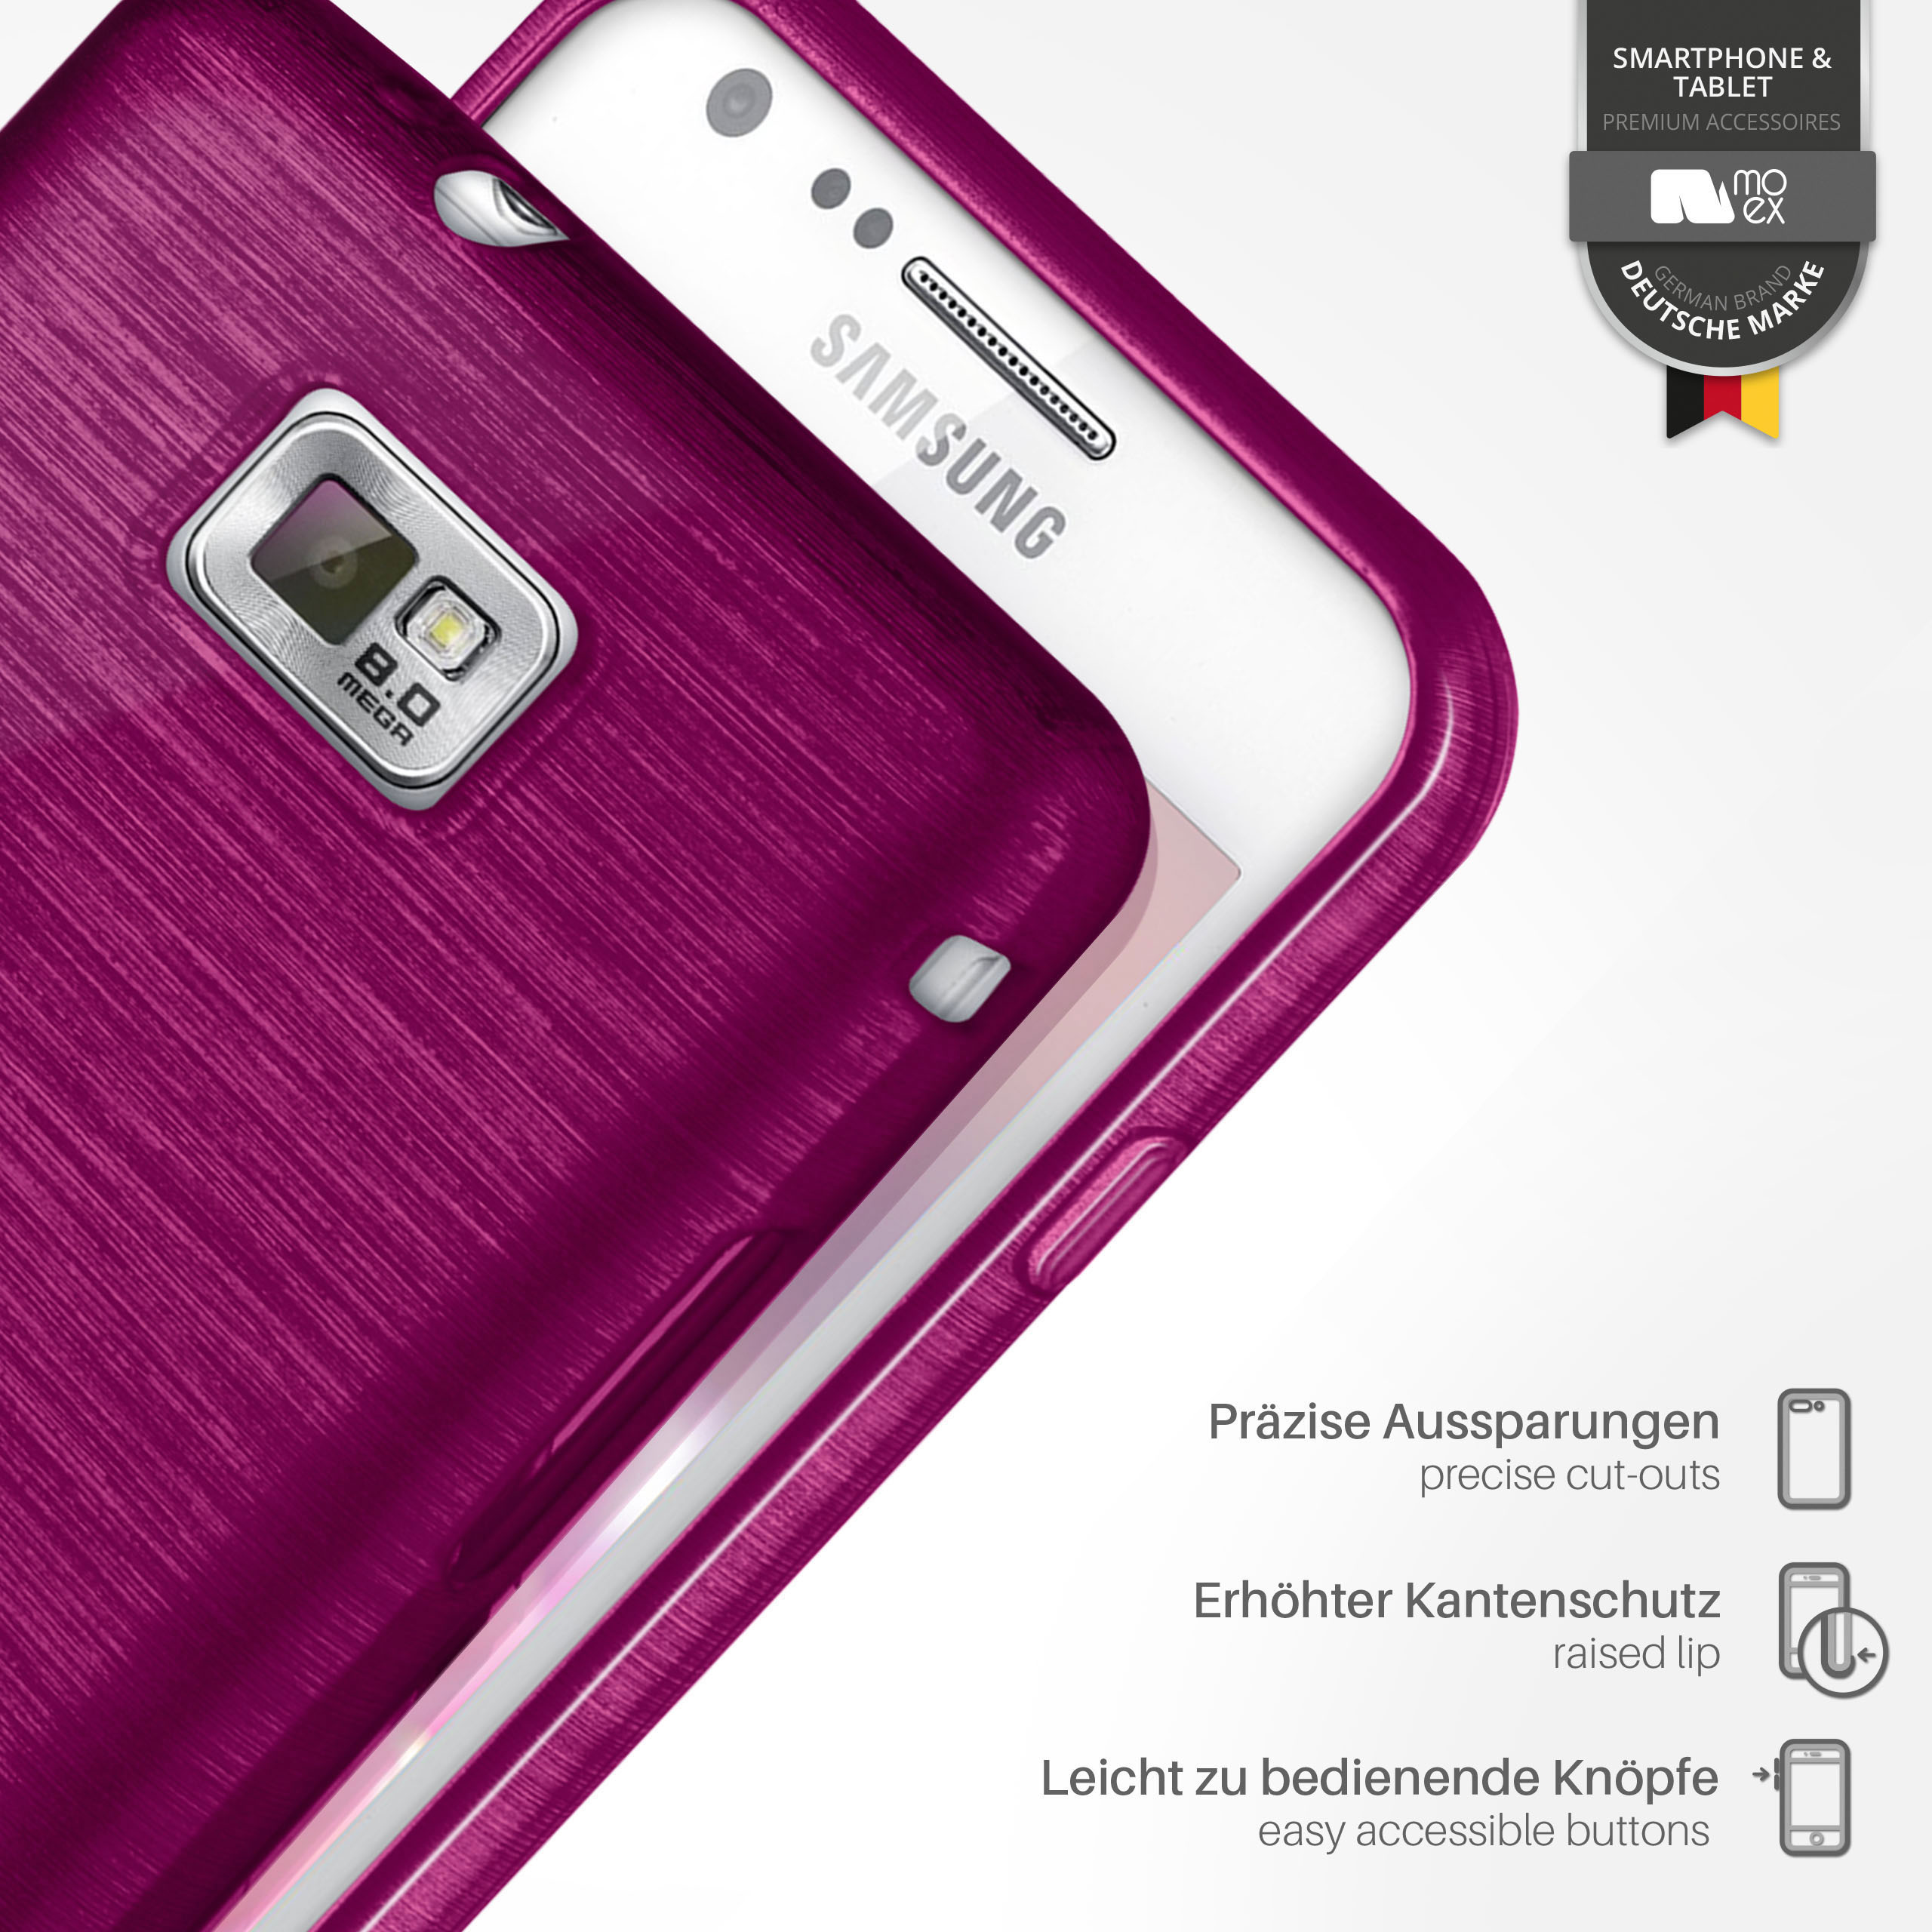 Galaxy / S2 Plus, S2 Samsung, MOEX Brushed Case, Purpure-Purple Backcover,